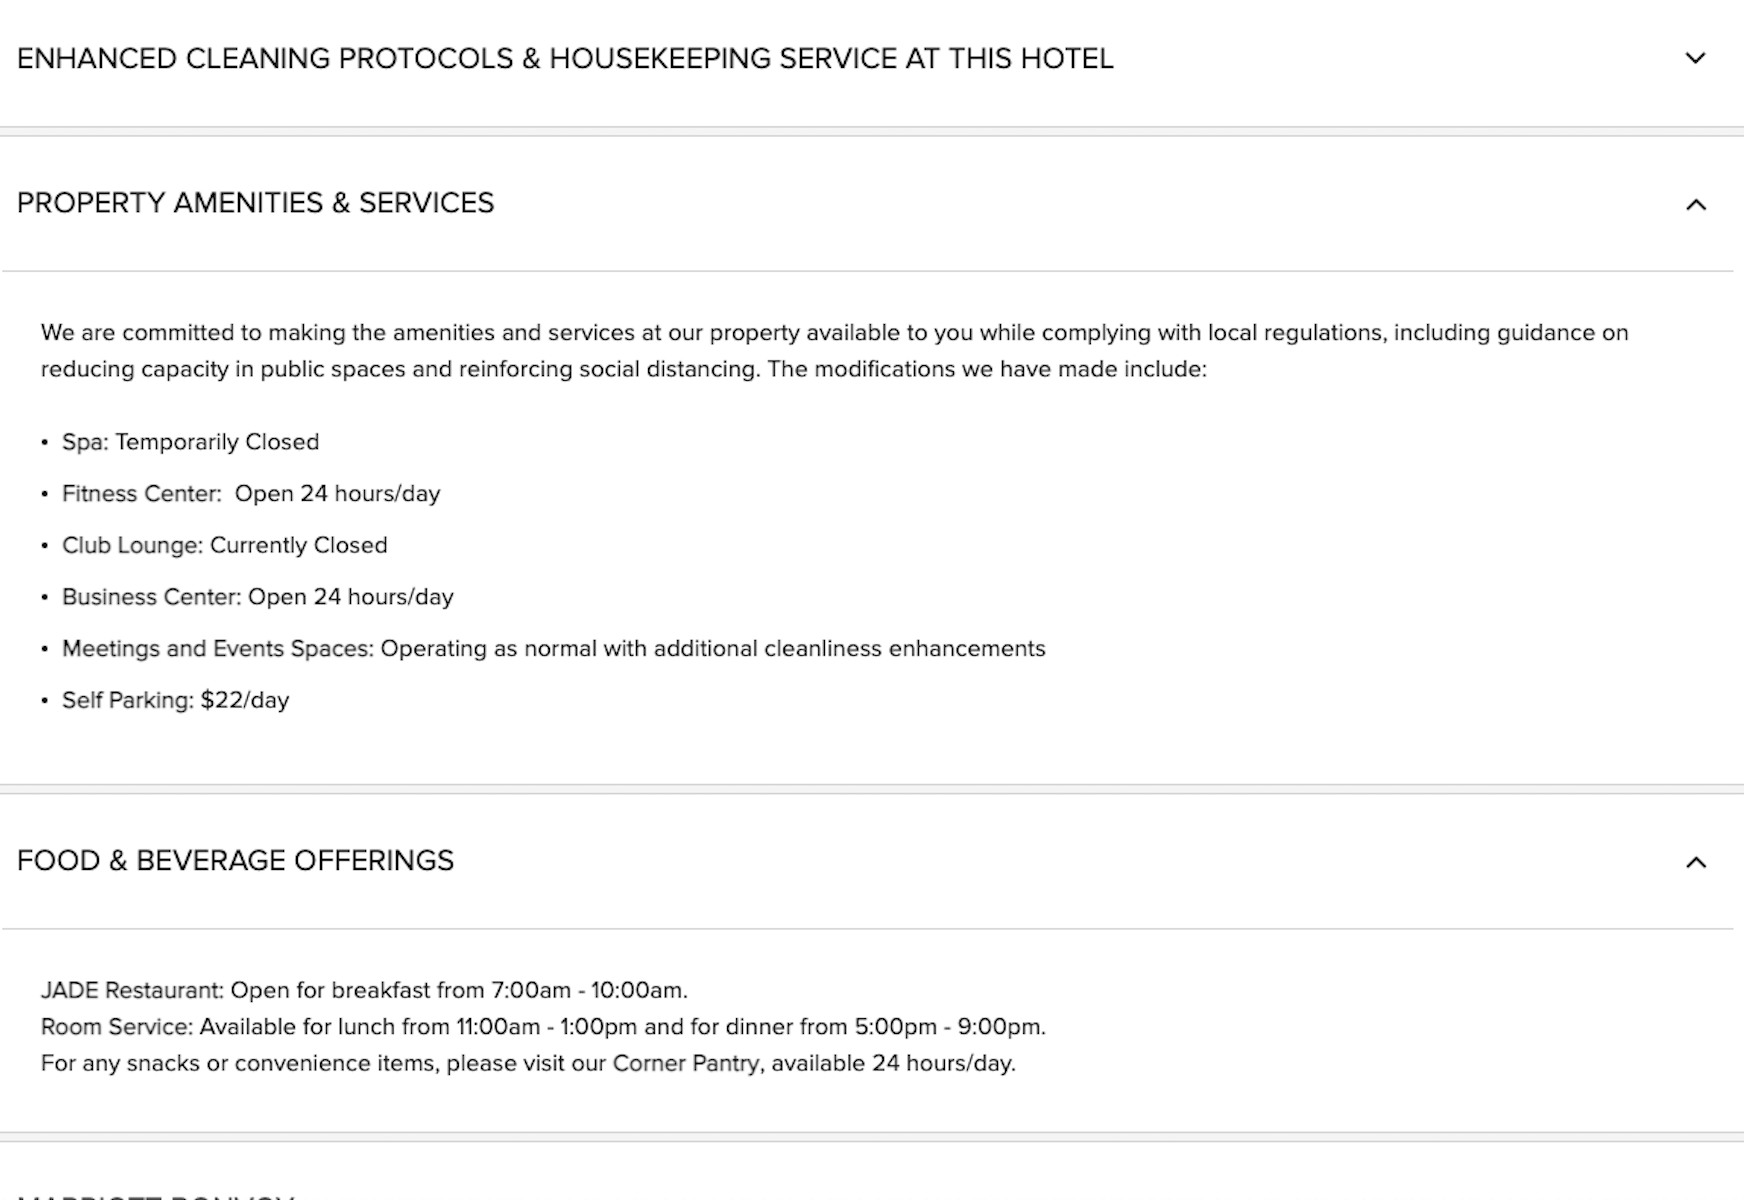 Screenshot from the Marriott 'what to expect' page showing the Sheraton Anchorage in Alaska